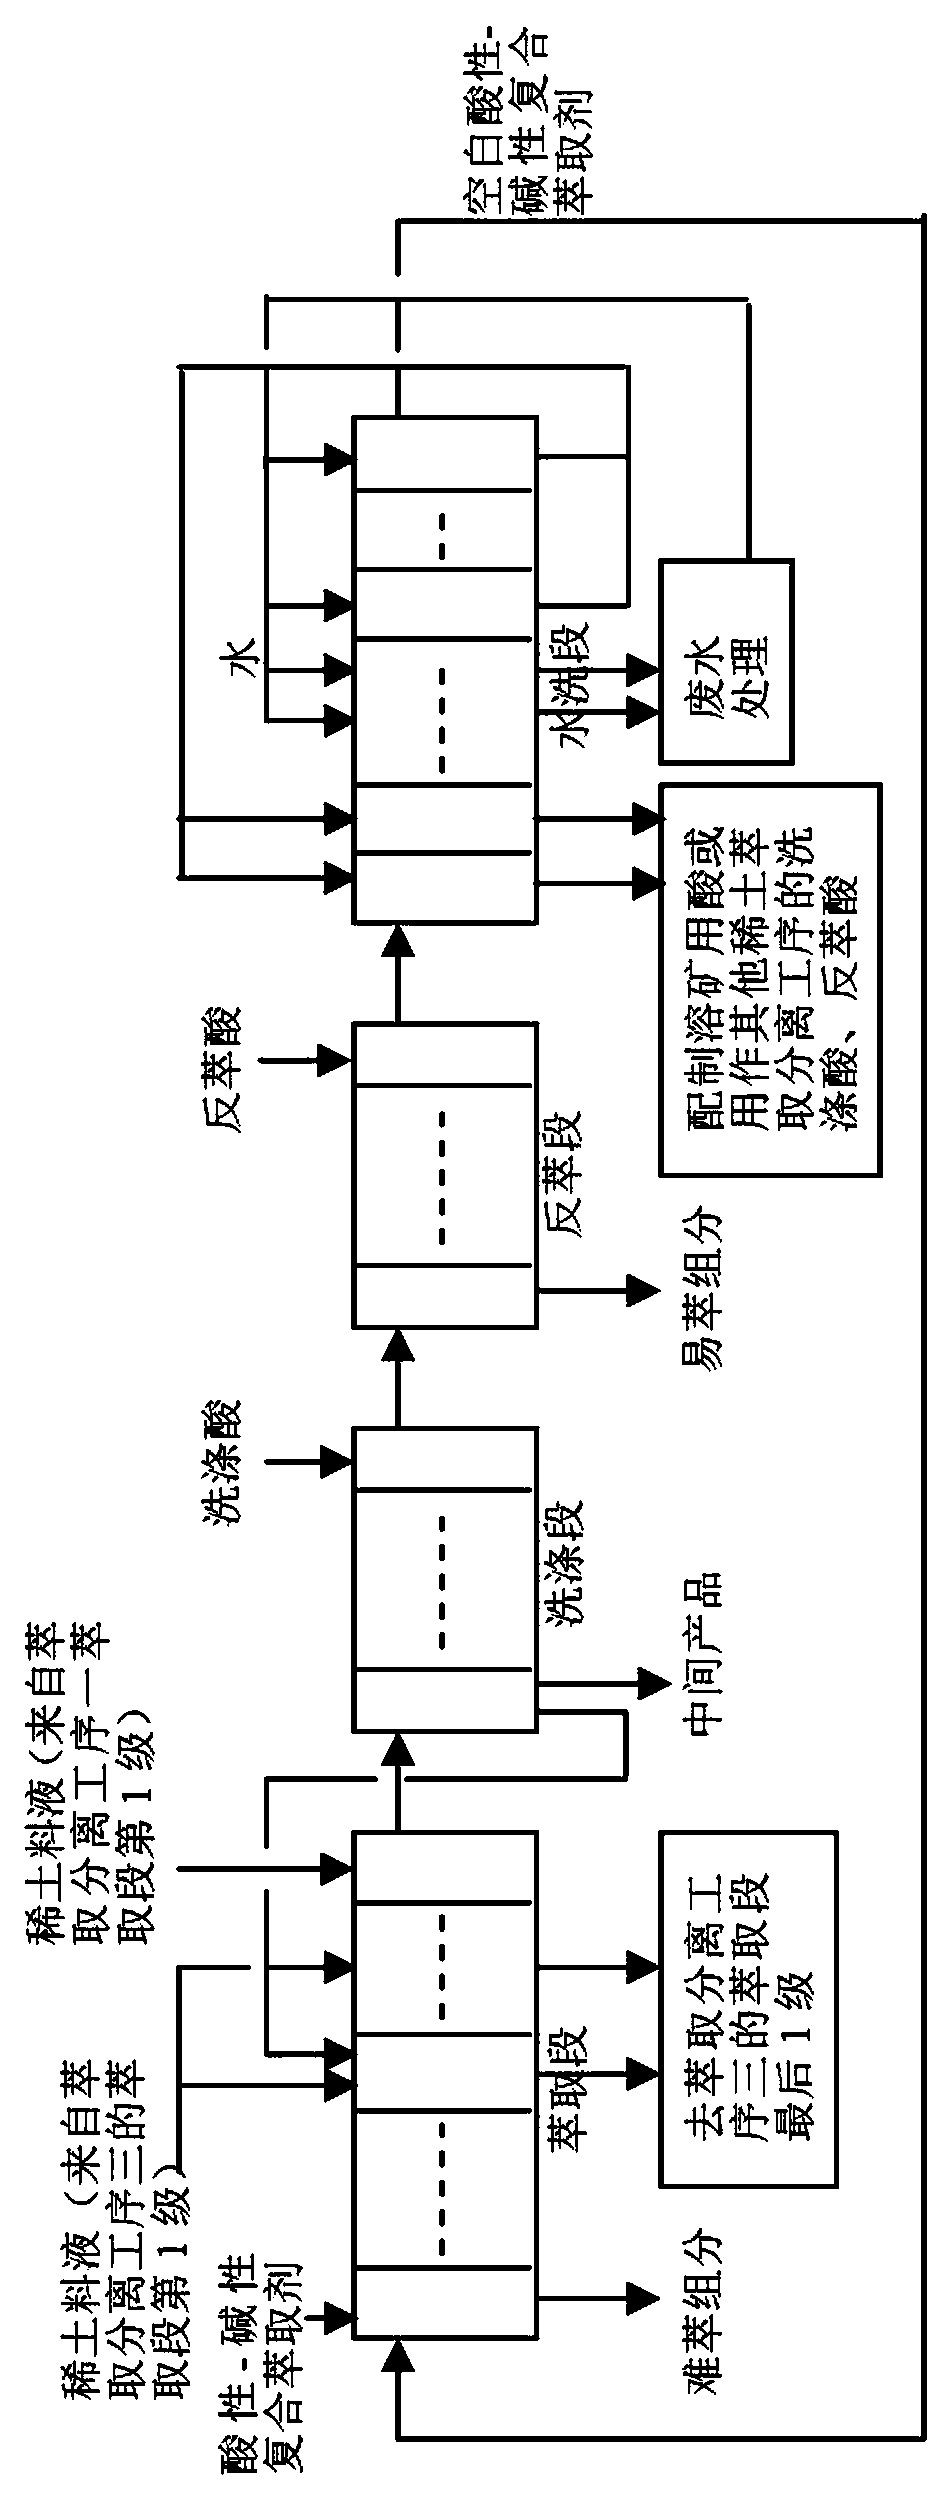 Extraction separation method of rare earth element